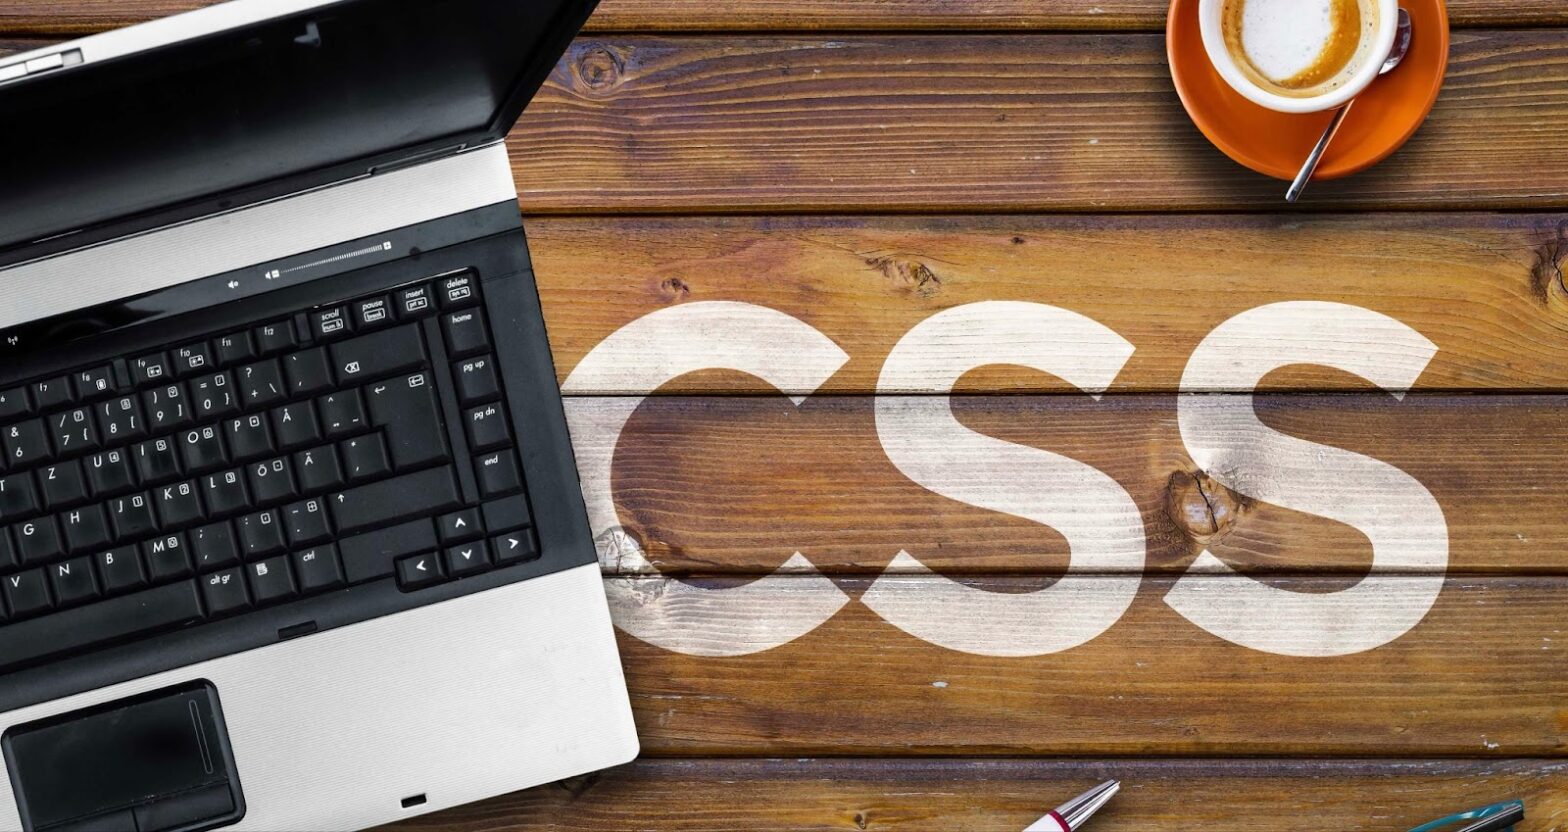 CSS on a wooden table next to a computer